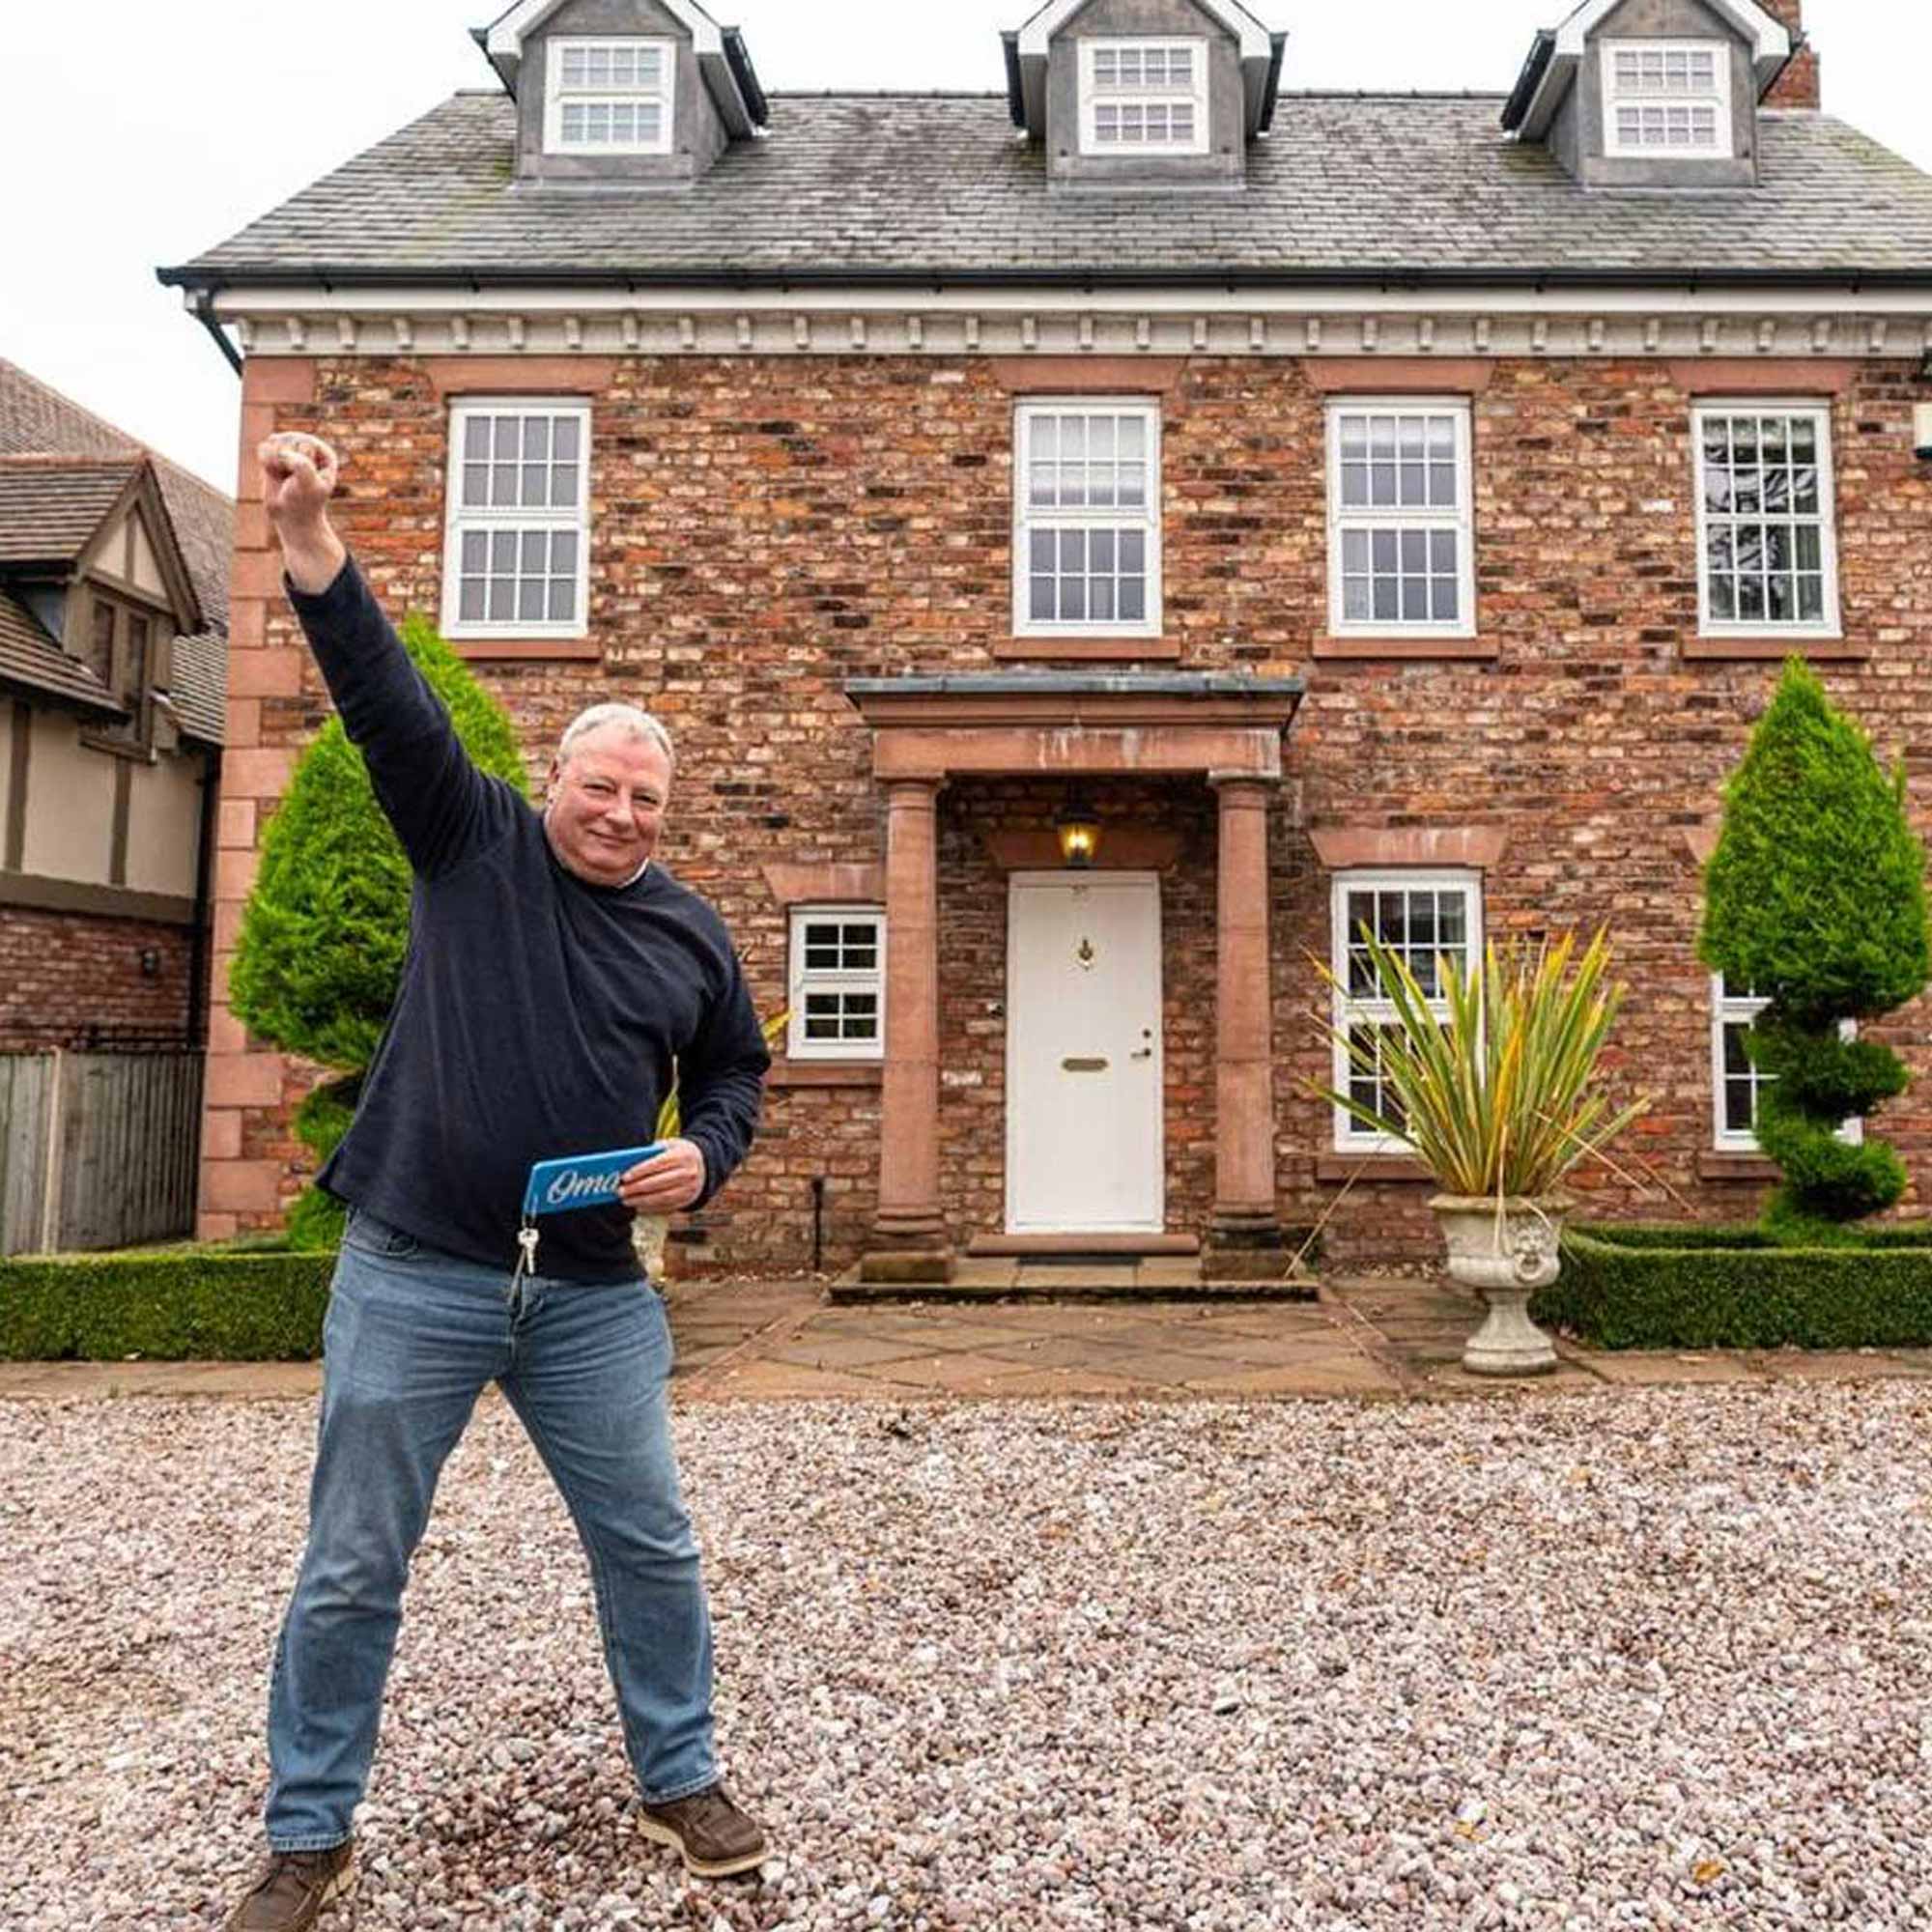 Winner of Million Pound House competition